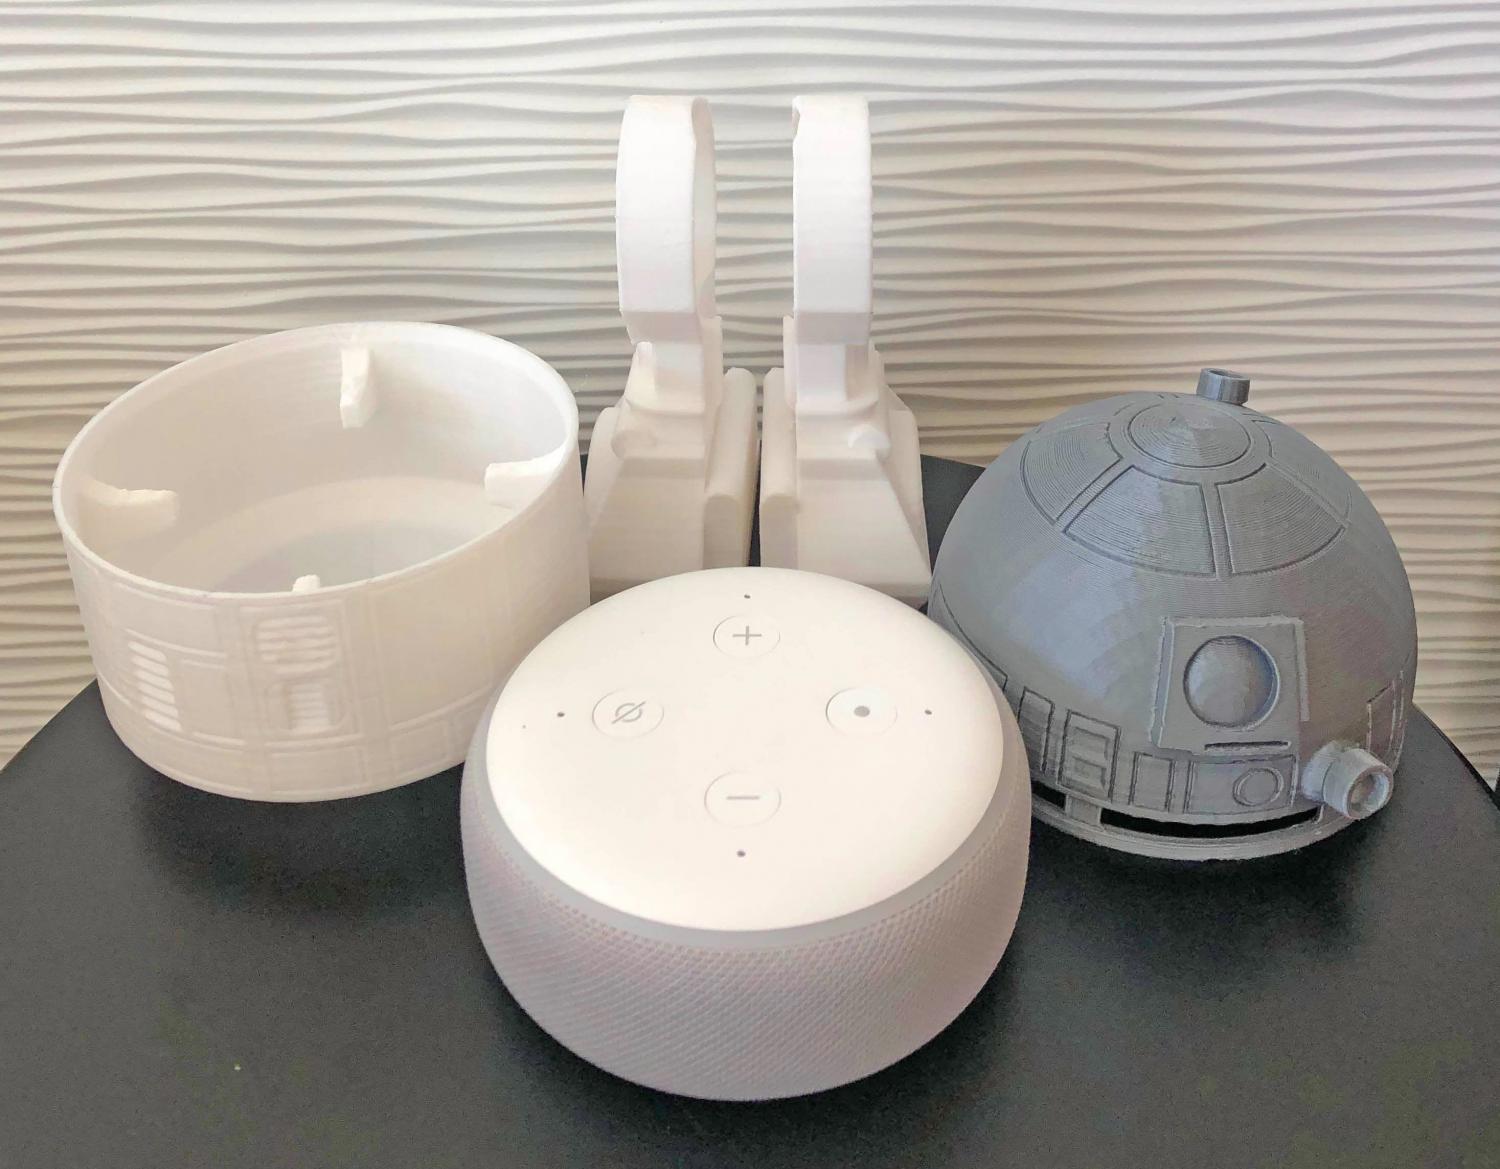 3D Printed Smart Speaker Holder Turns Your Amazon Echo Dot Into Star Wars Character R2-D2